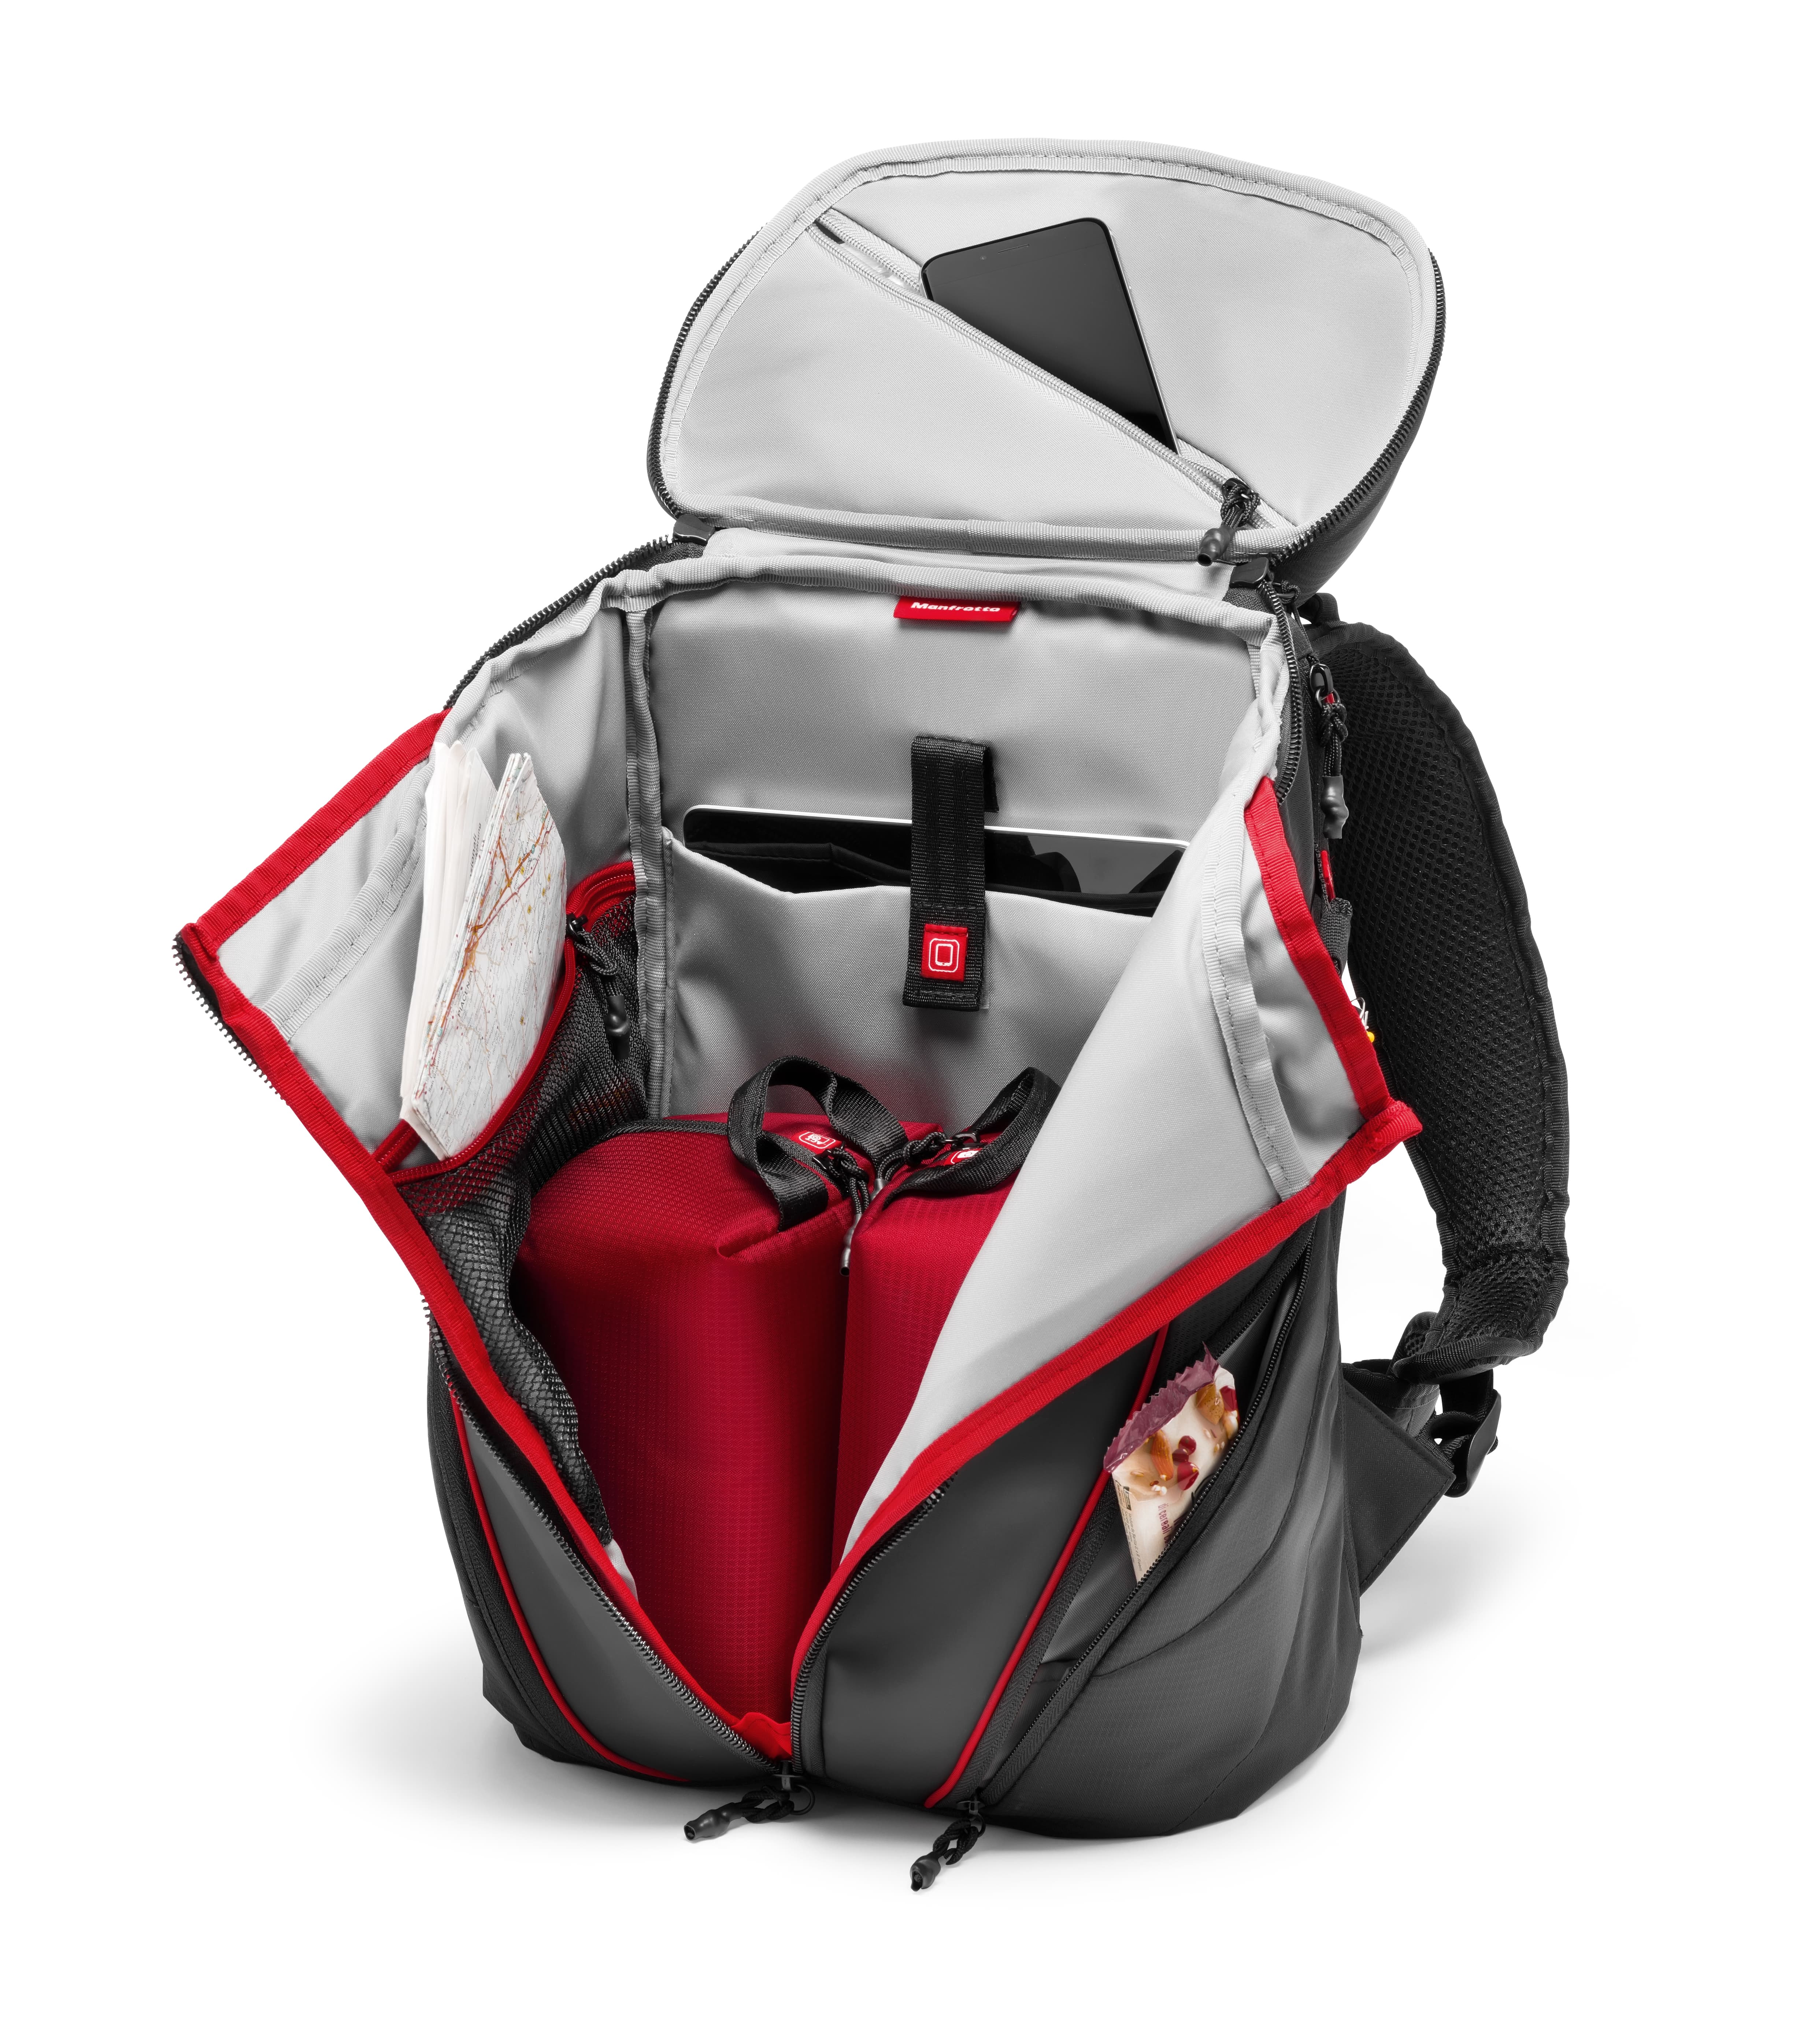 The Off Road Stunt backpack